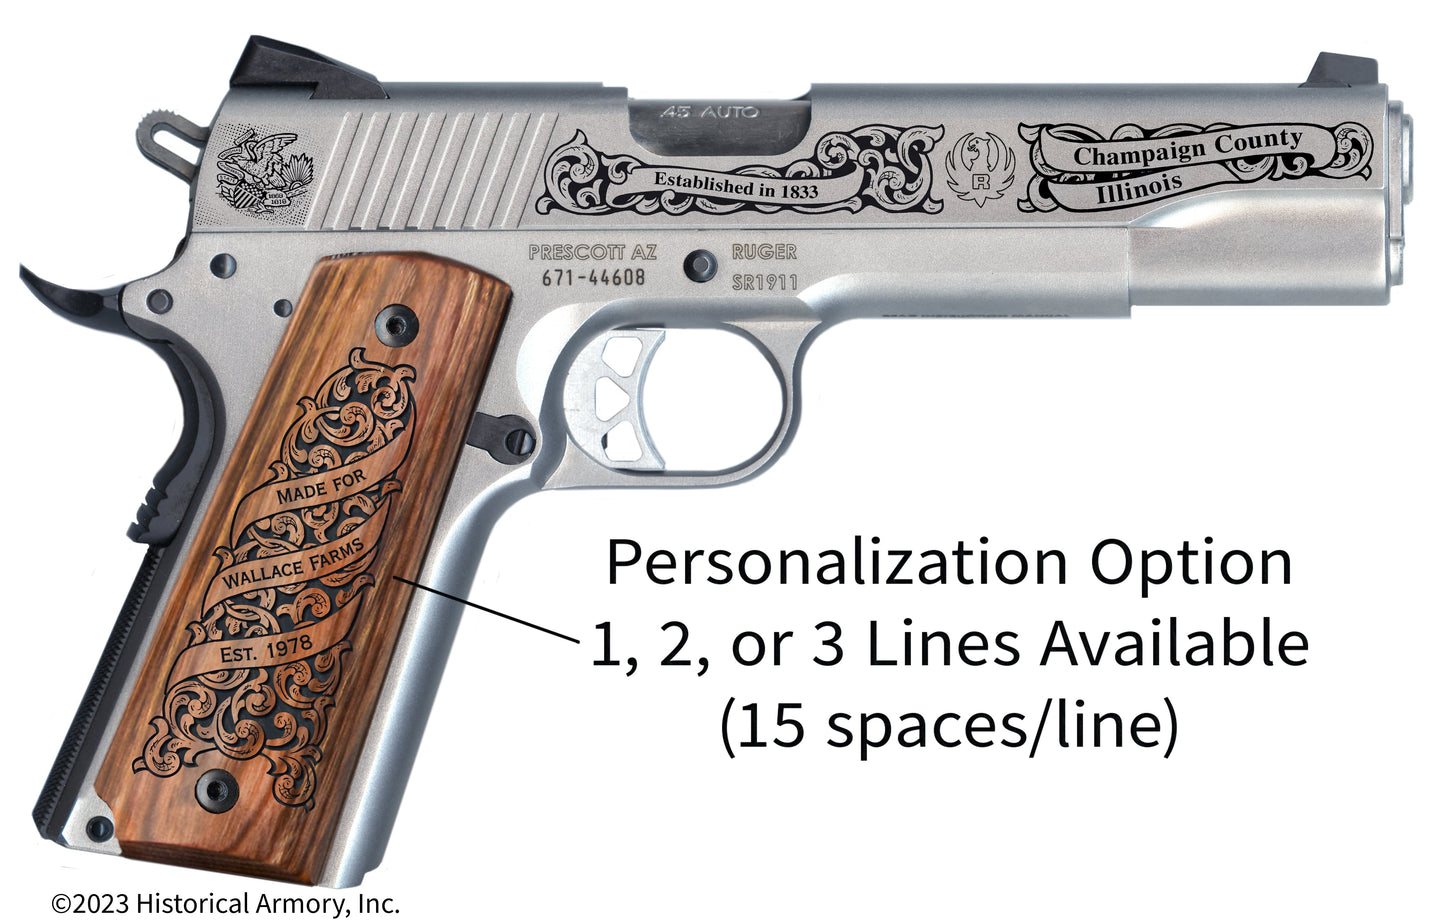 Champaign County Illinois Personalized Engraved .45 Auto Ruger 1911